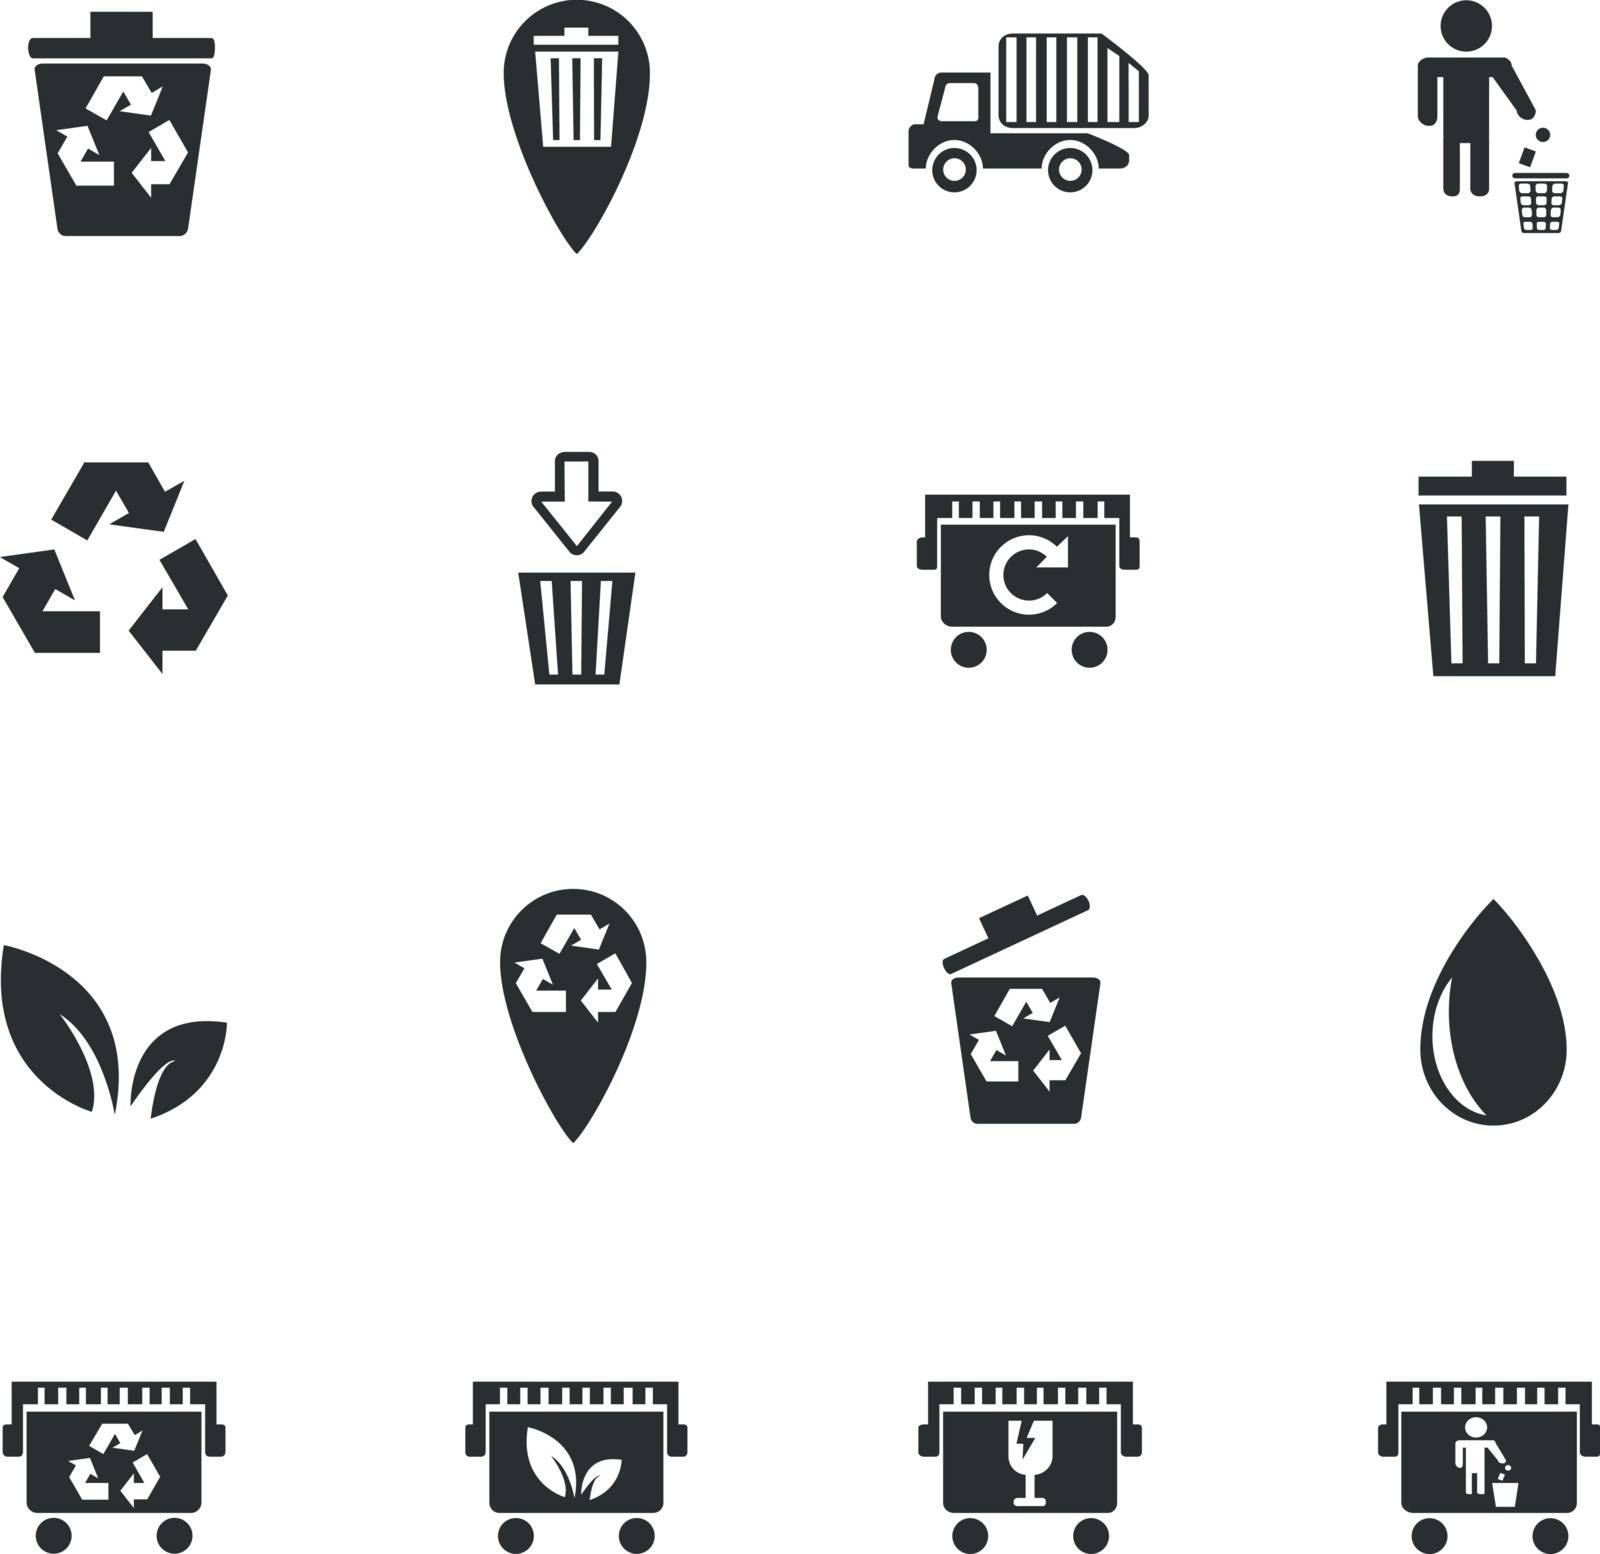 garbage web icons for user interface design